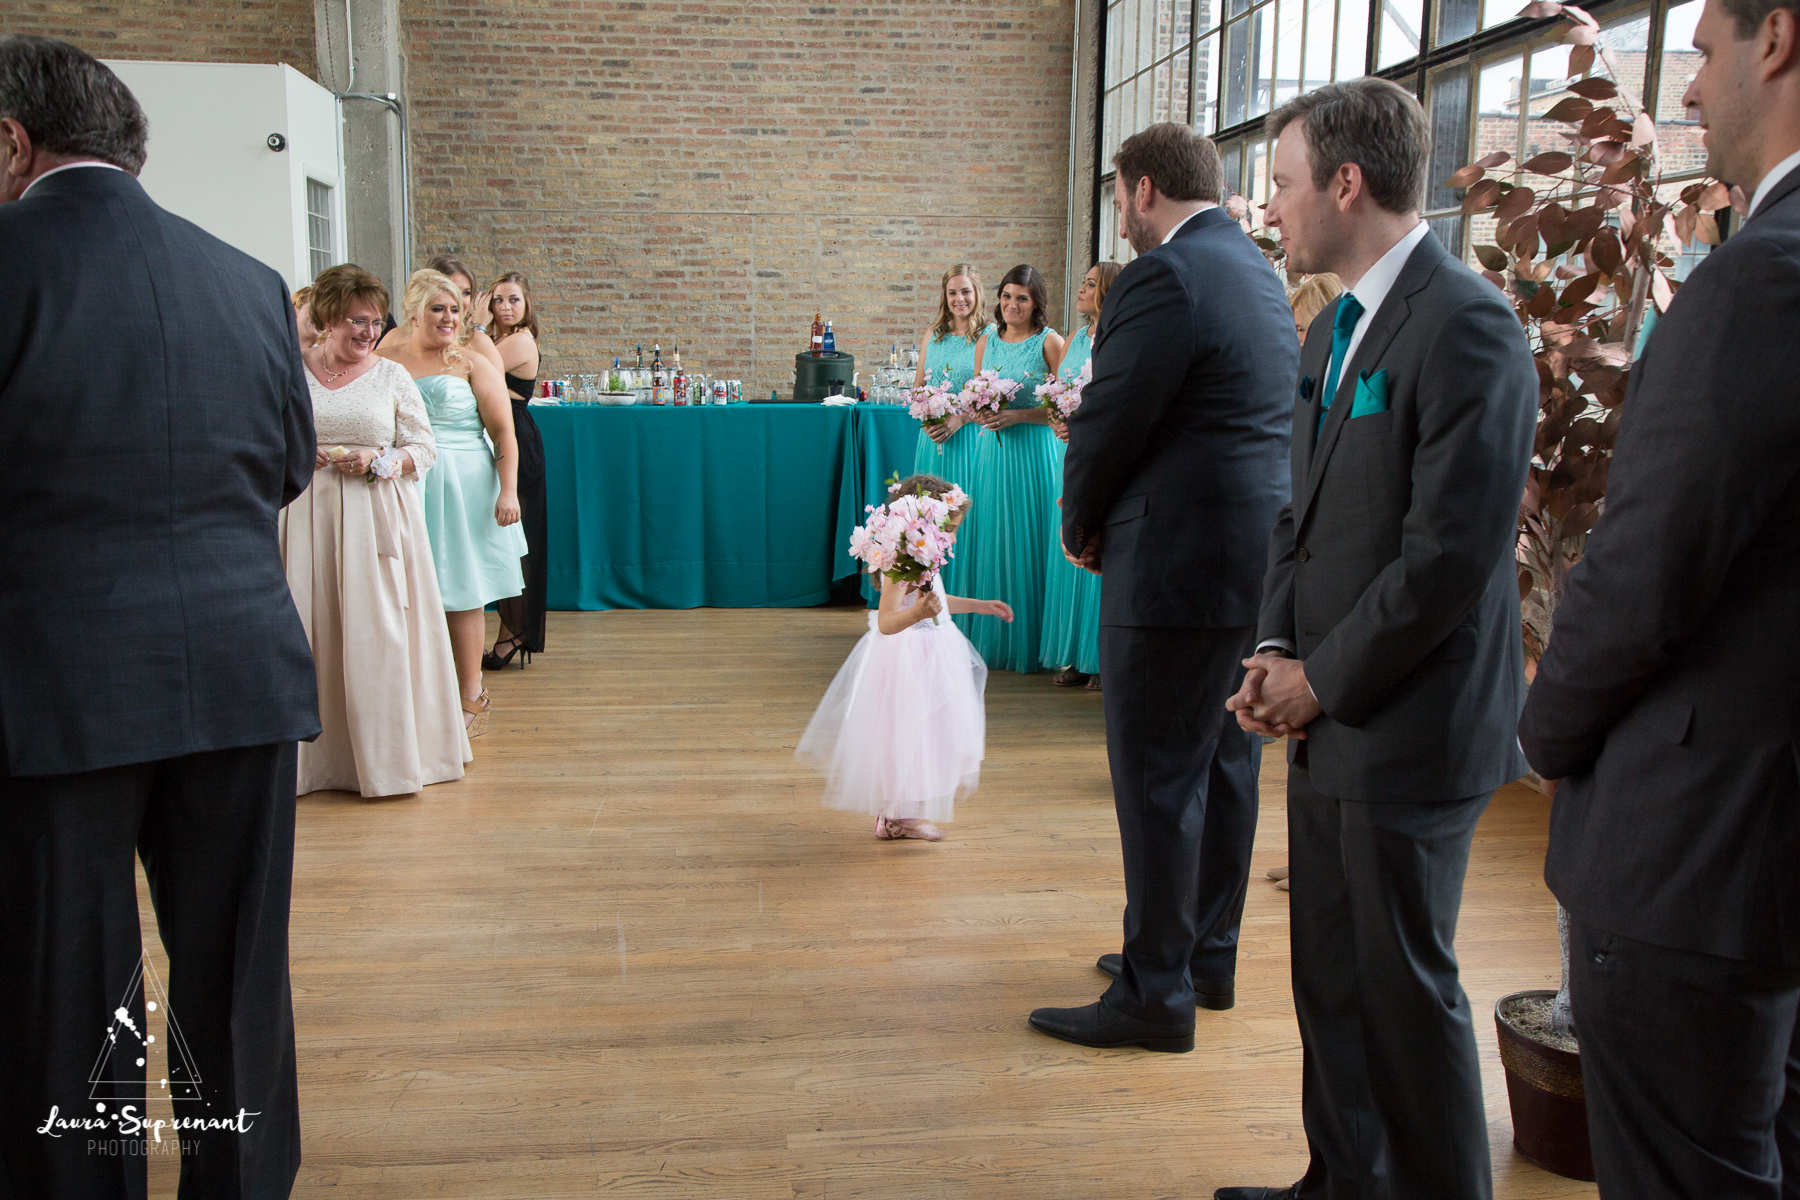 wedding_photography_chicago_wrigley_field_ravenswood_event_center_laura_suprenant (50 of 82).jpg